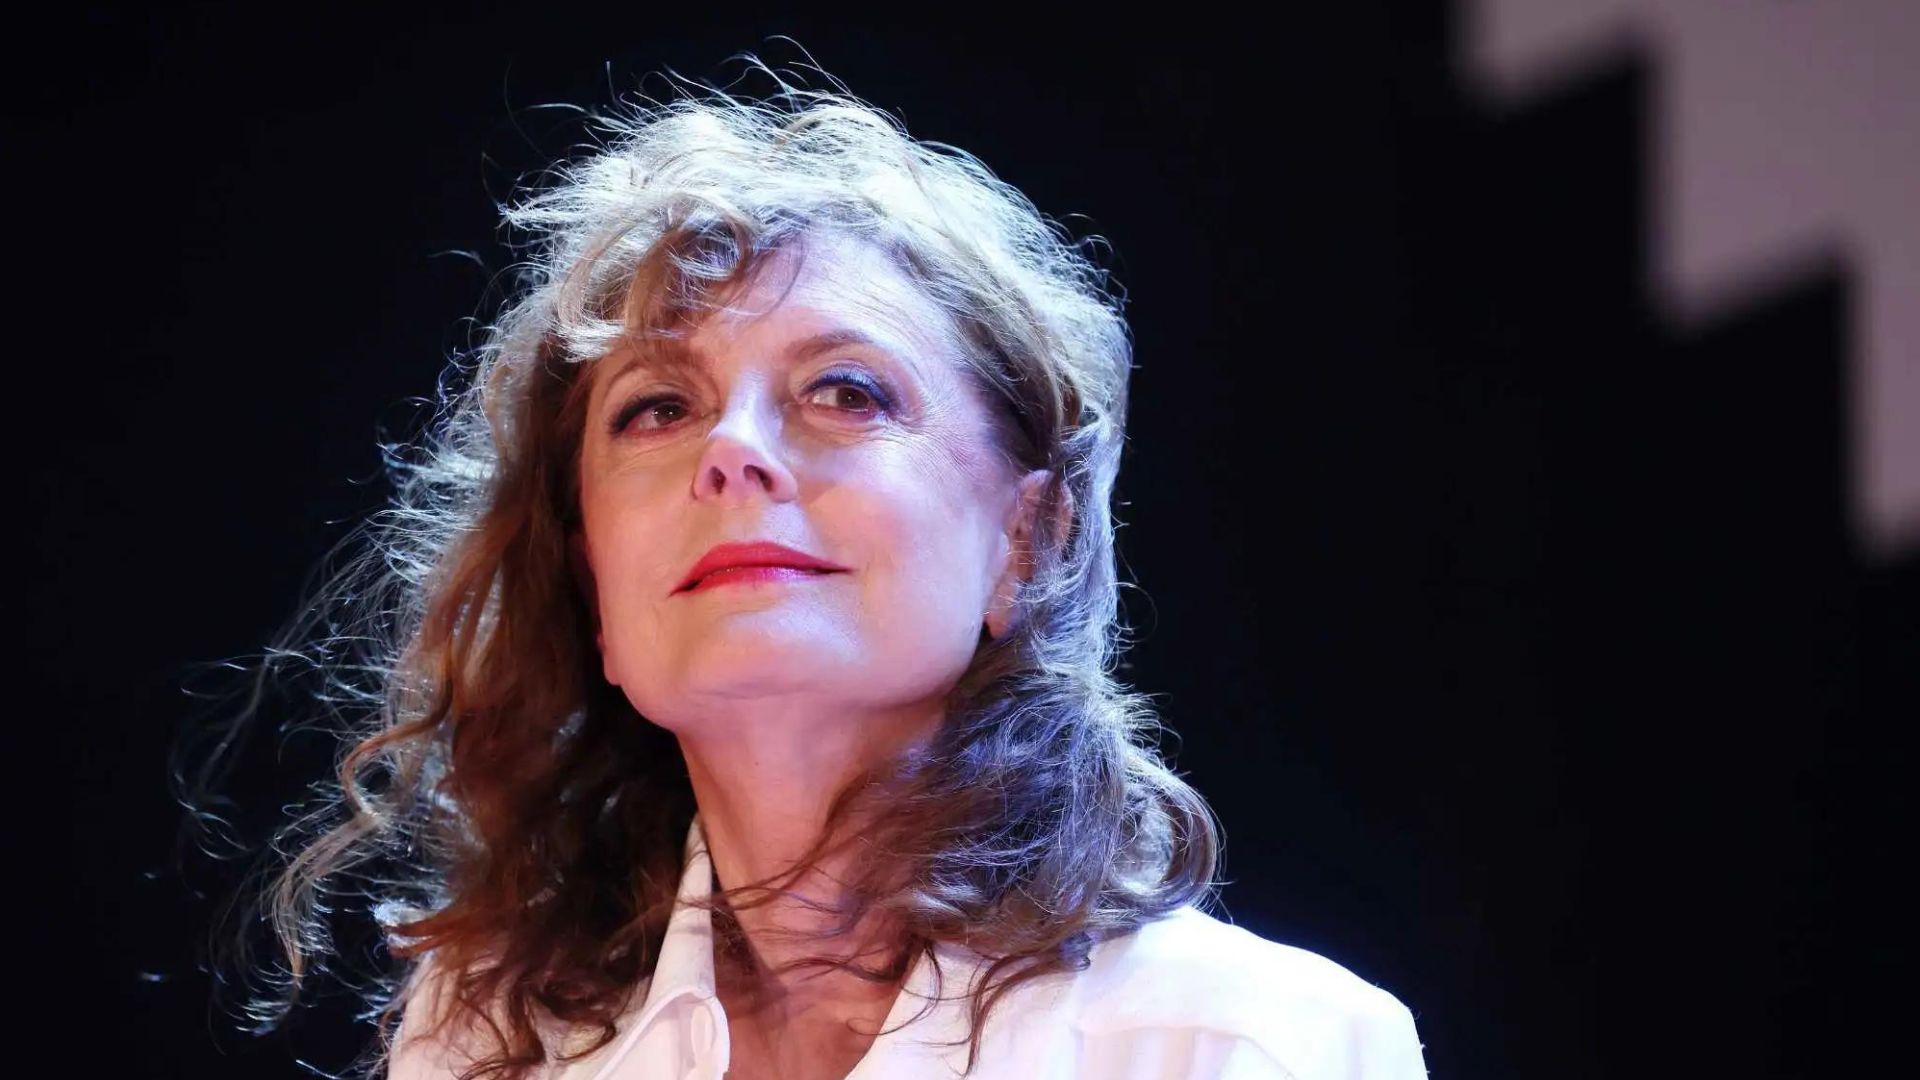 About Susan Sarandon Husband And Her Anti-Semitic Remarks